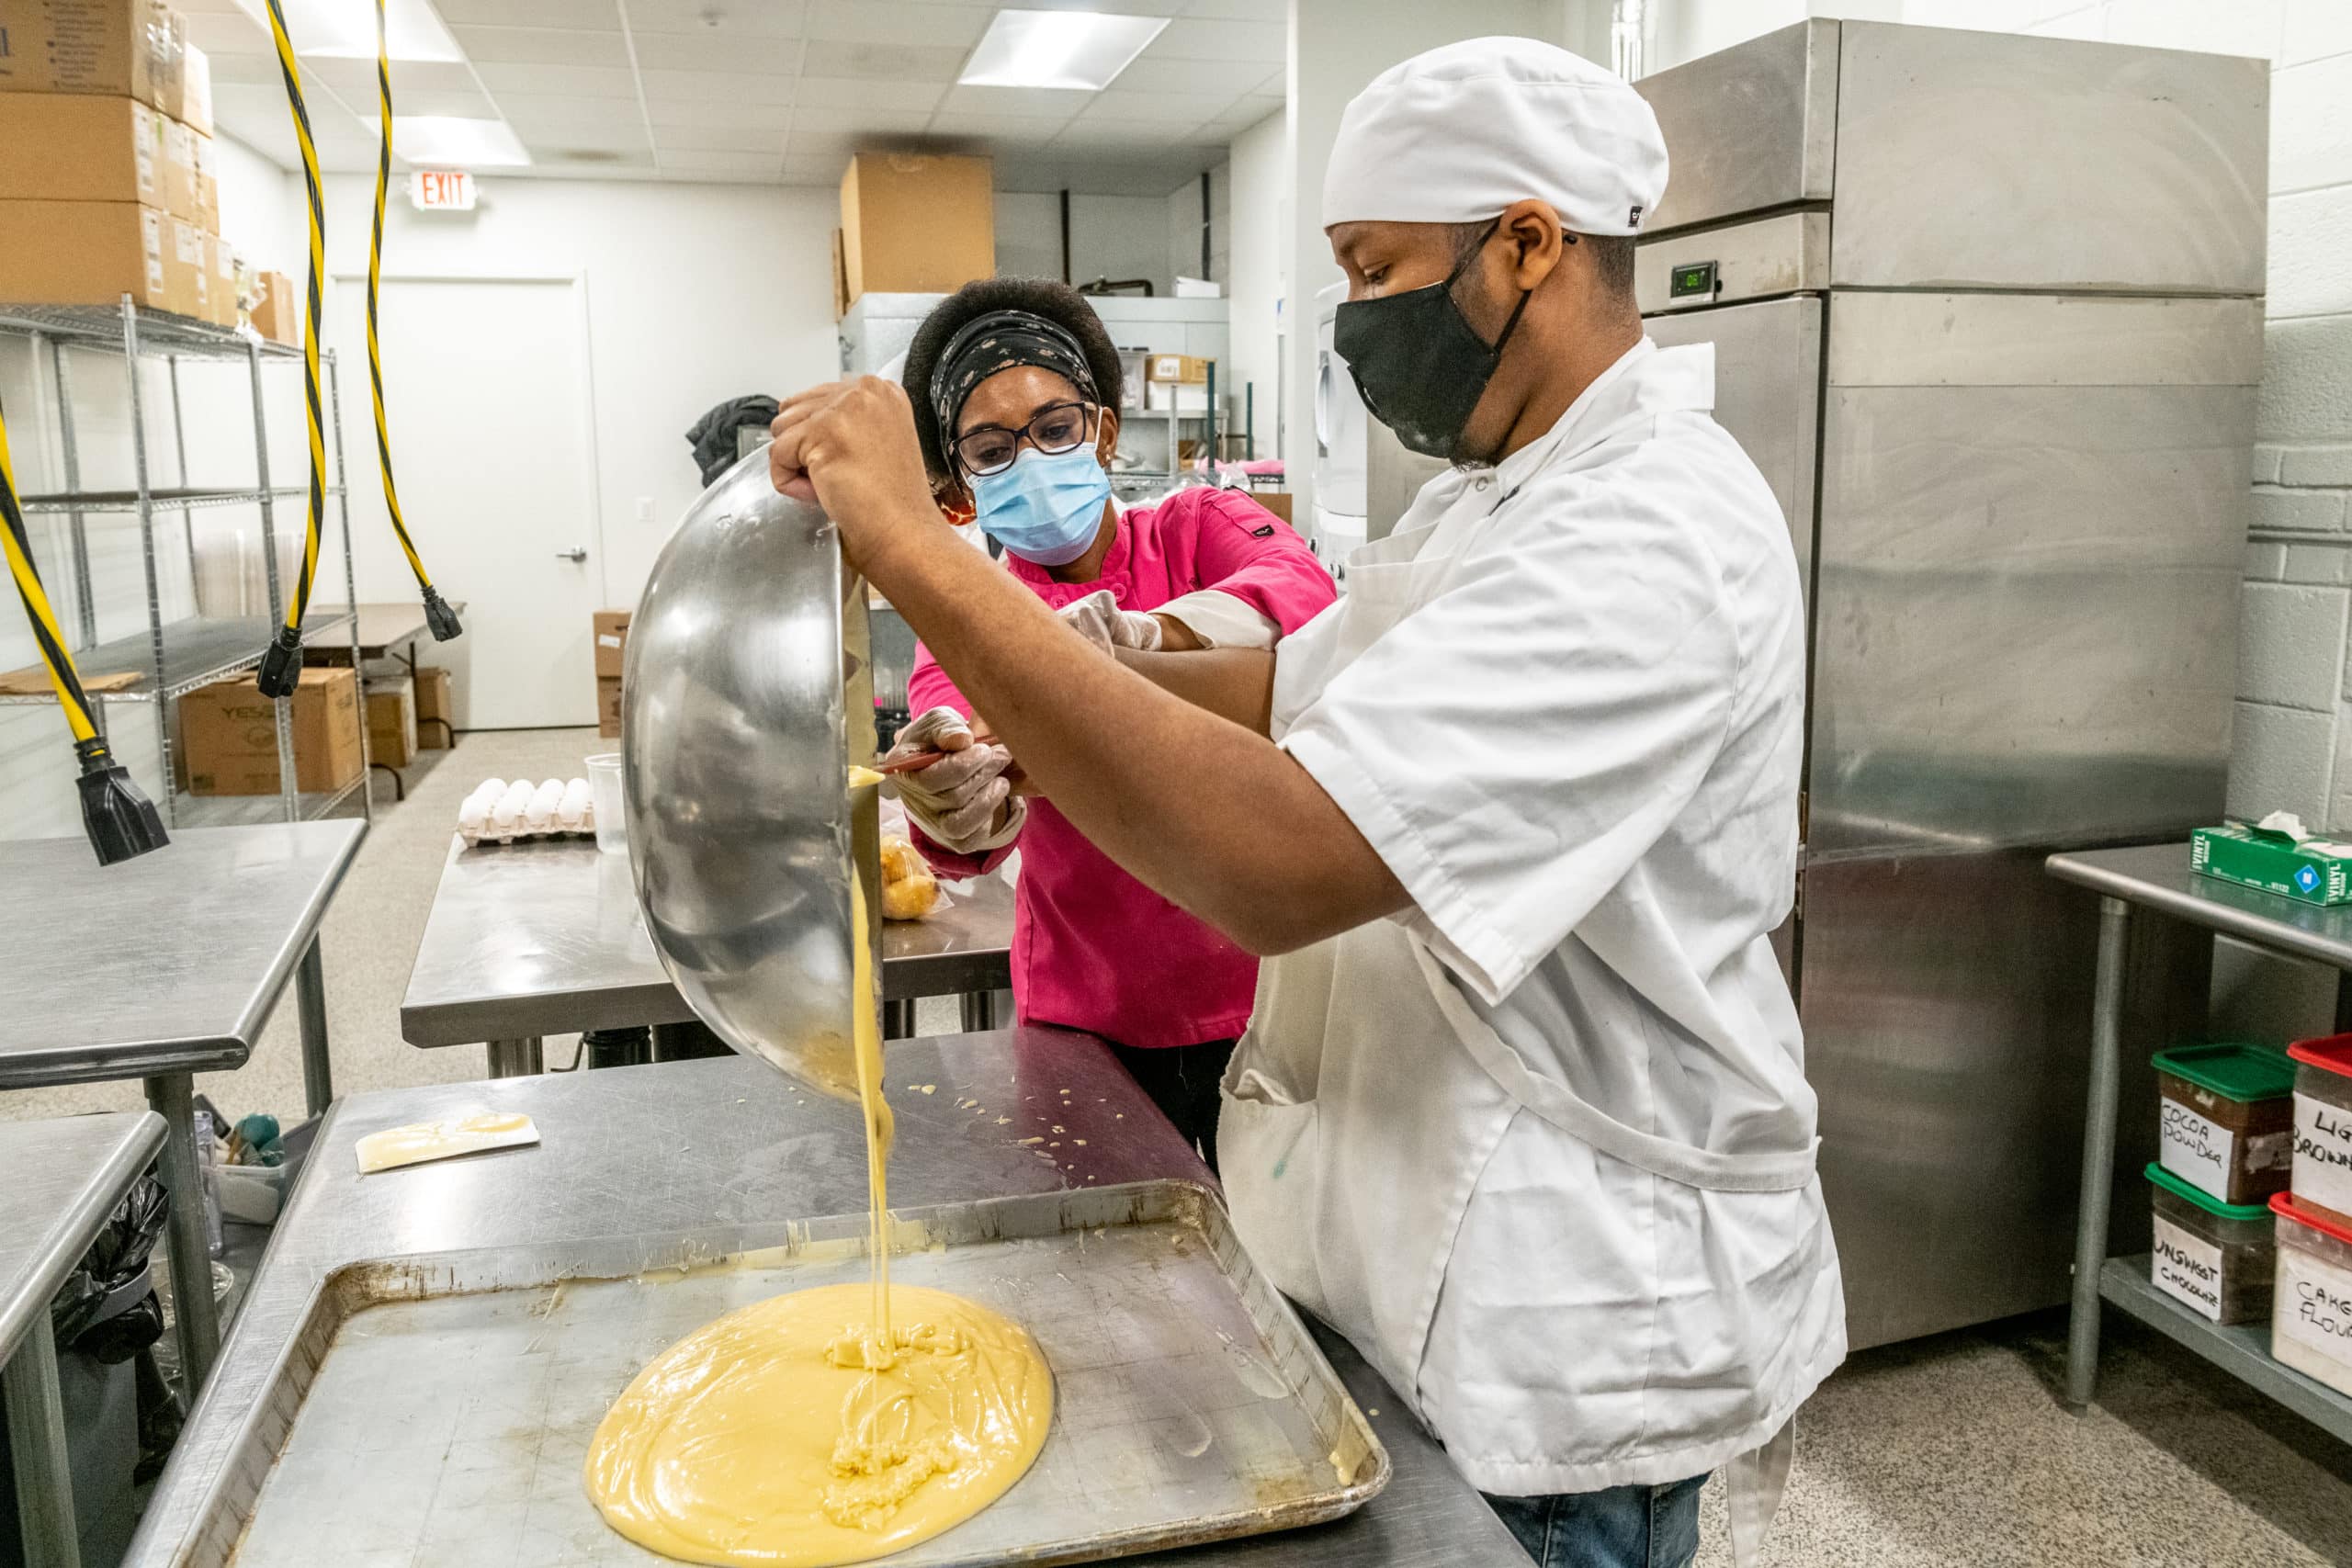 Chef instructs student as he pours cake batter into sheet pan